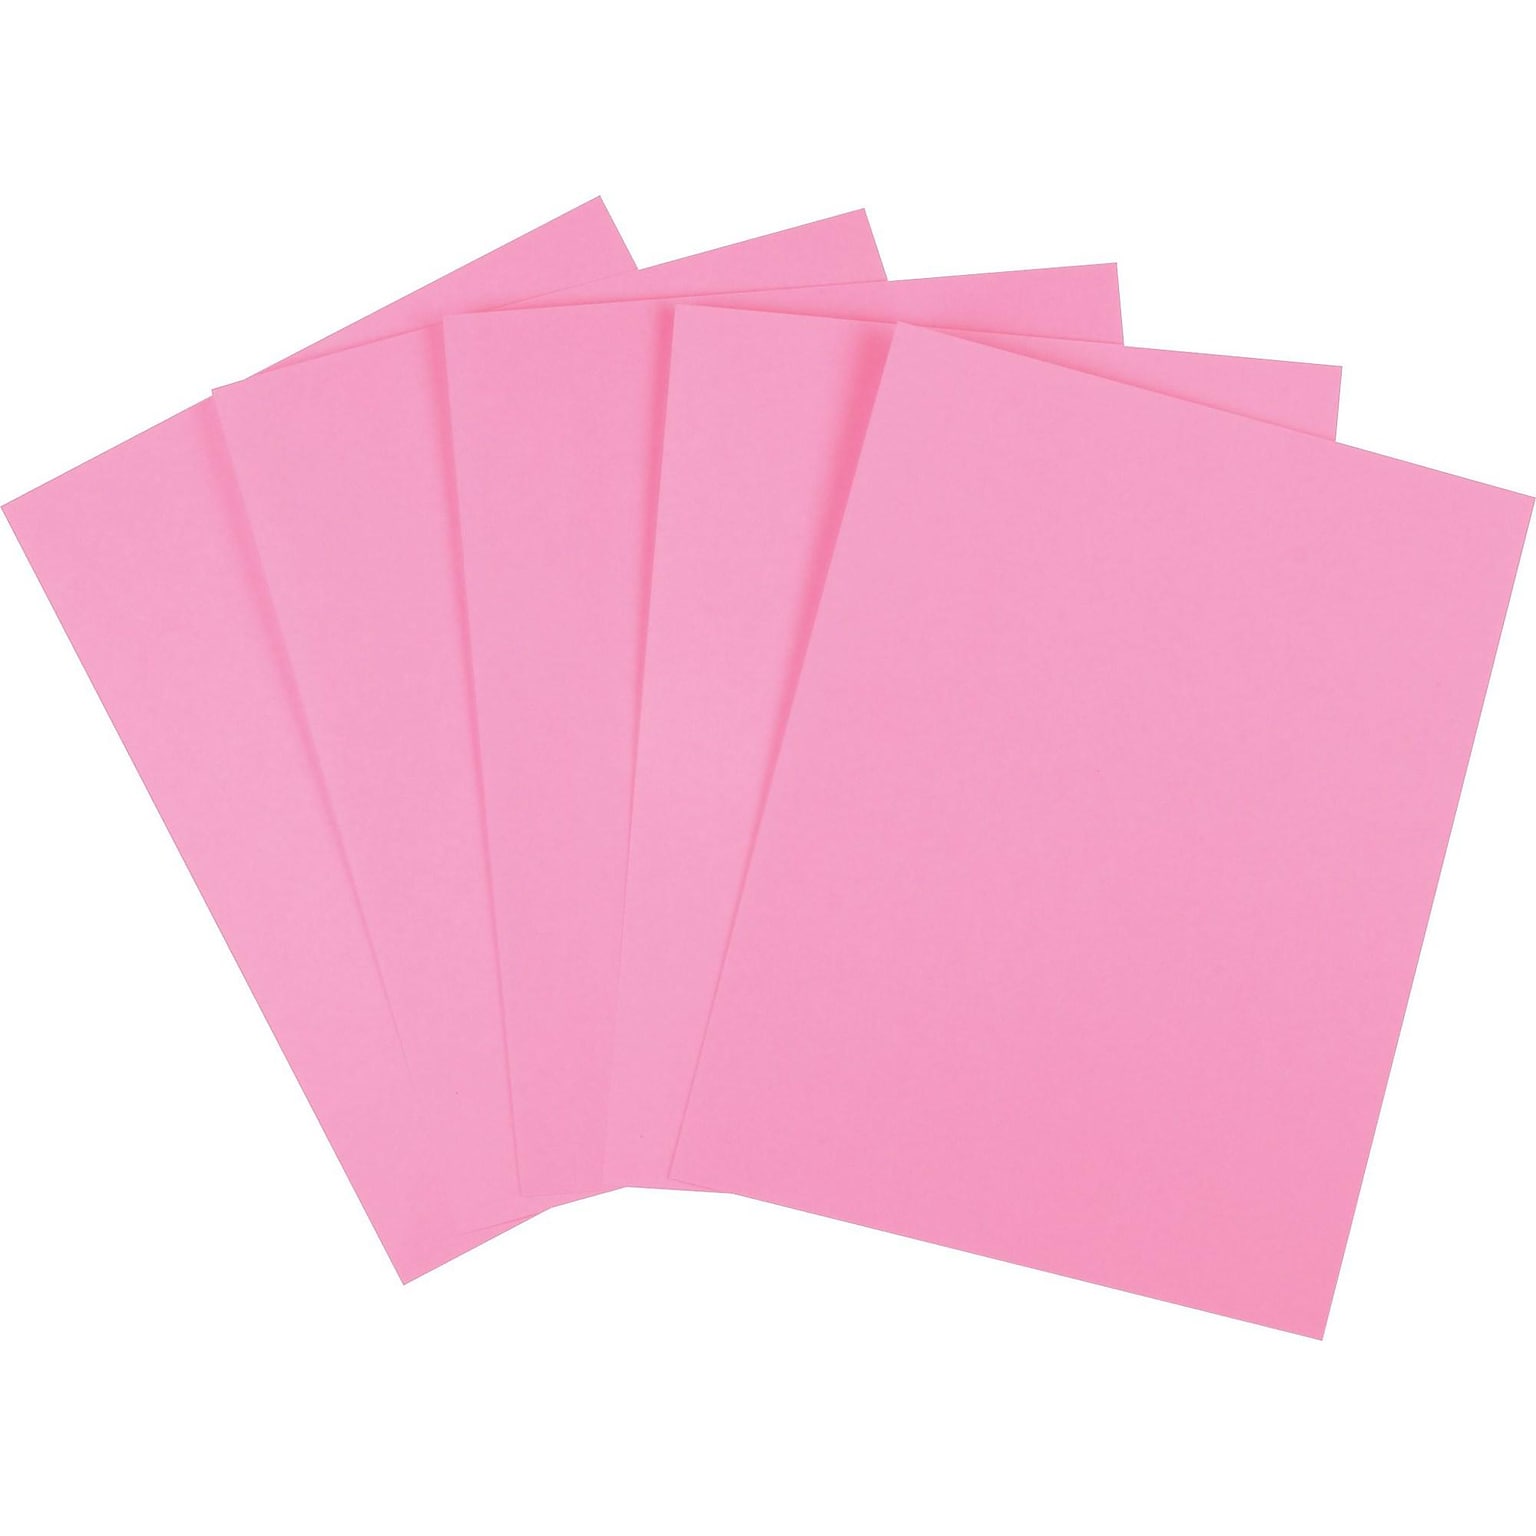 Staples Brights Multipurpose Colored Paper, 24 lb, 8.5 x 11, Pink, 500/Ream, 10 Reams/Carton (20106A)